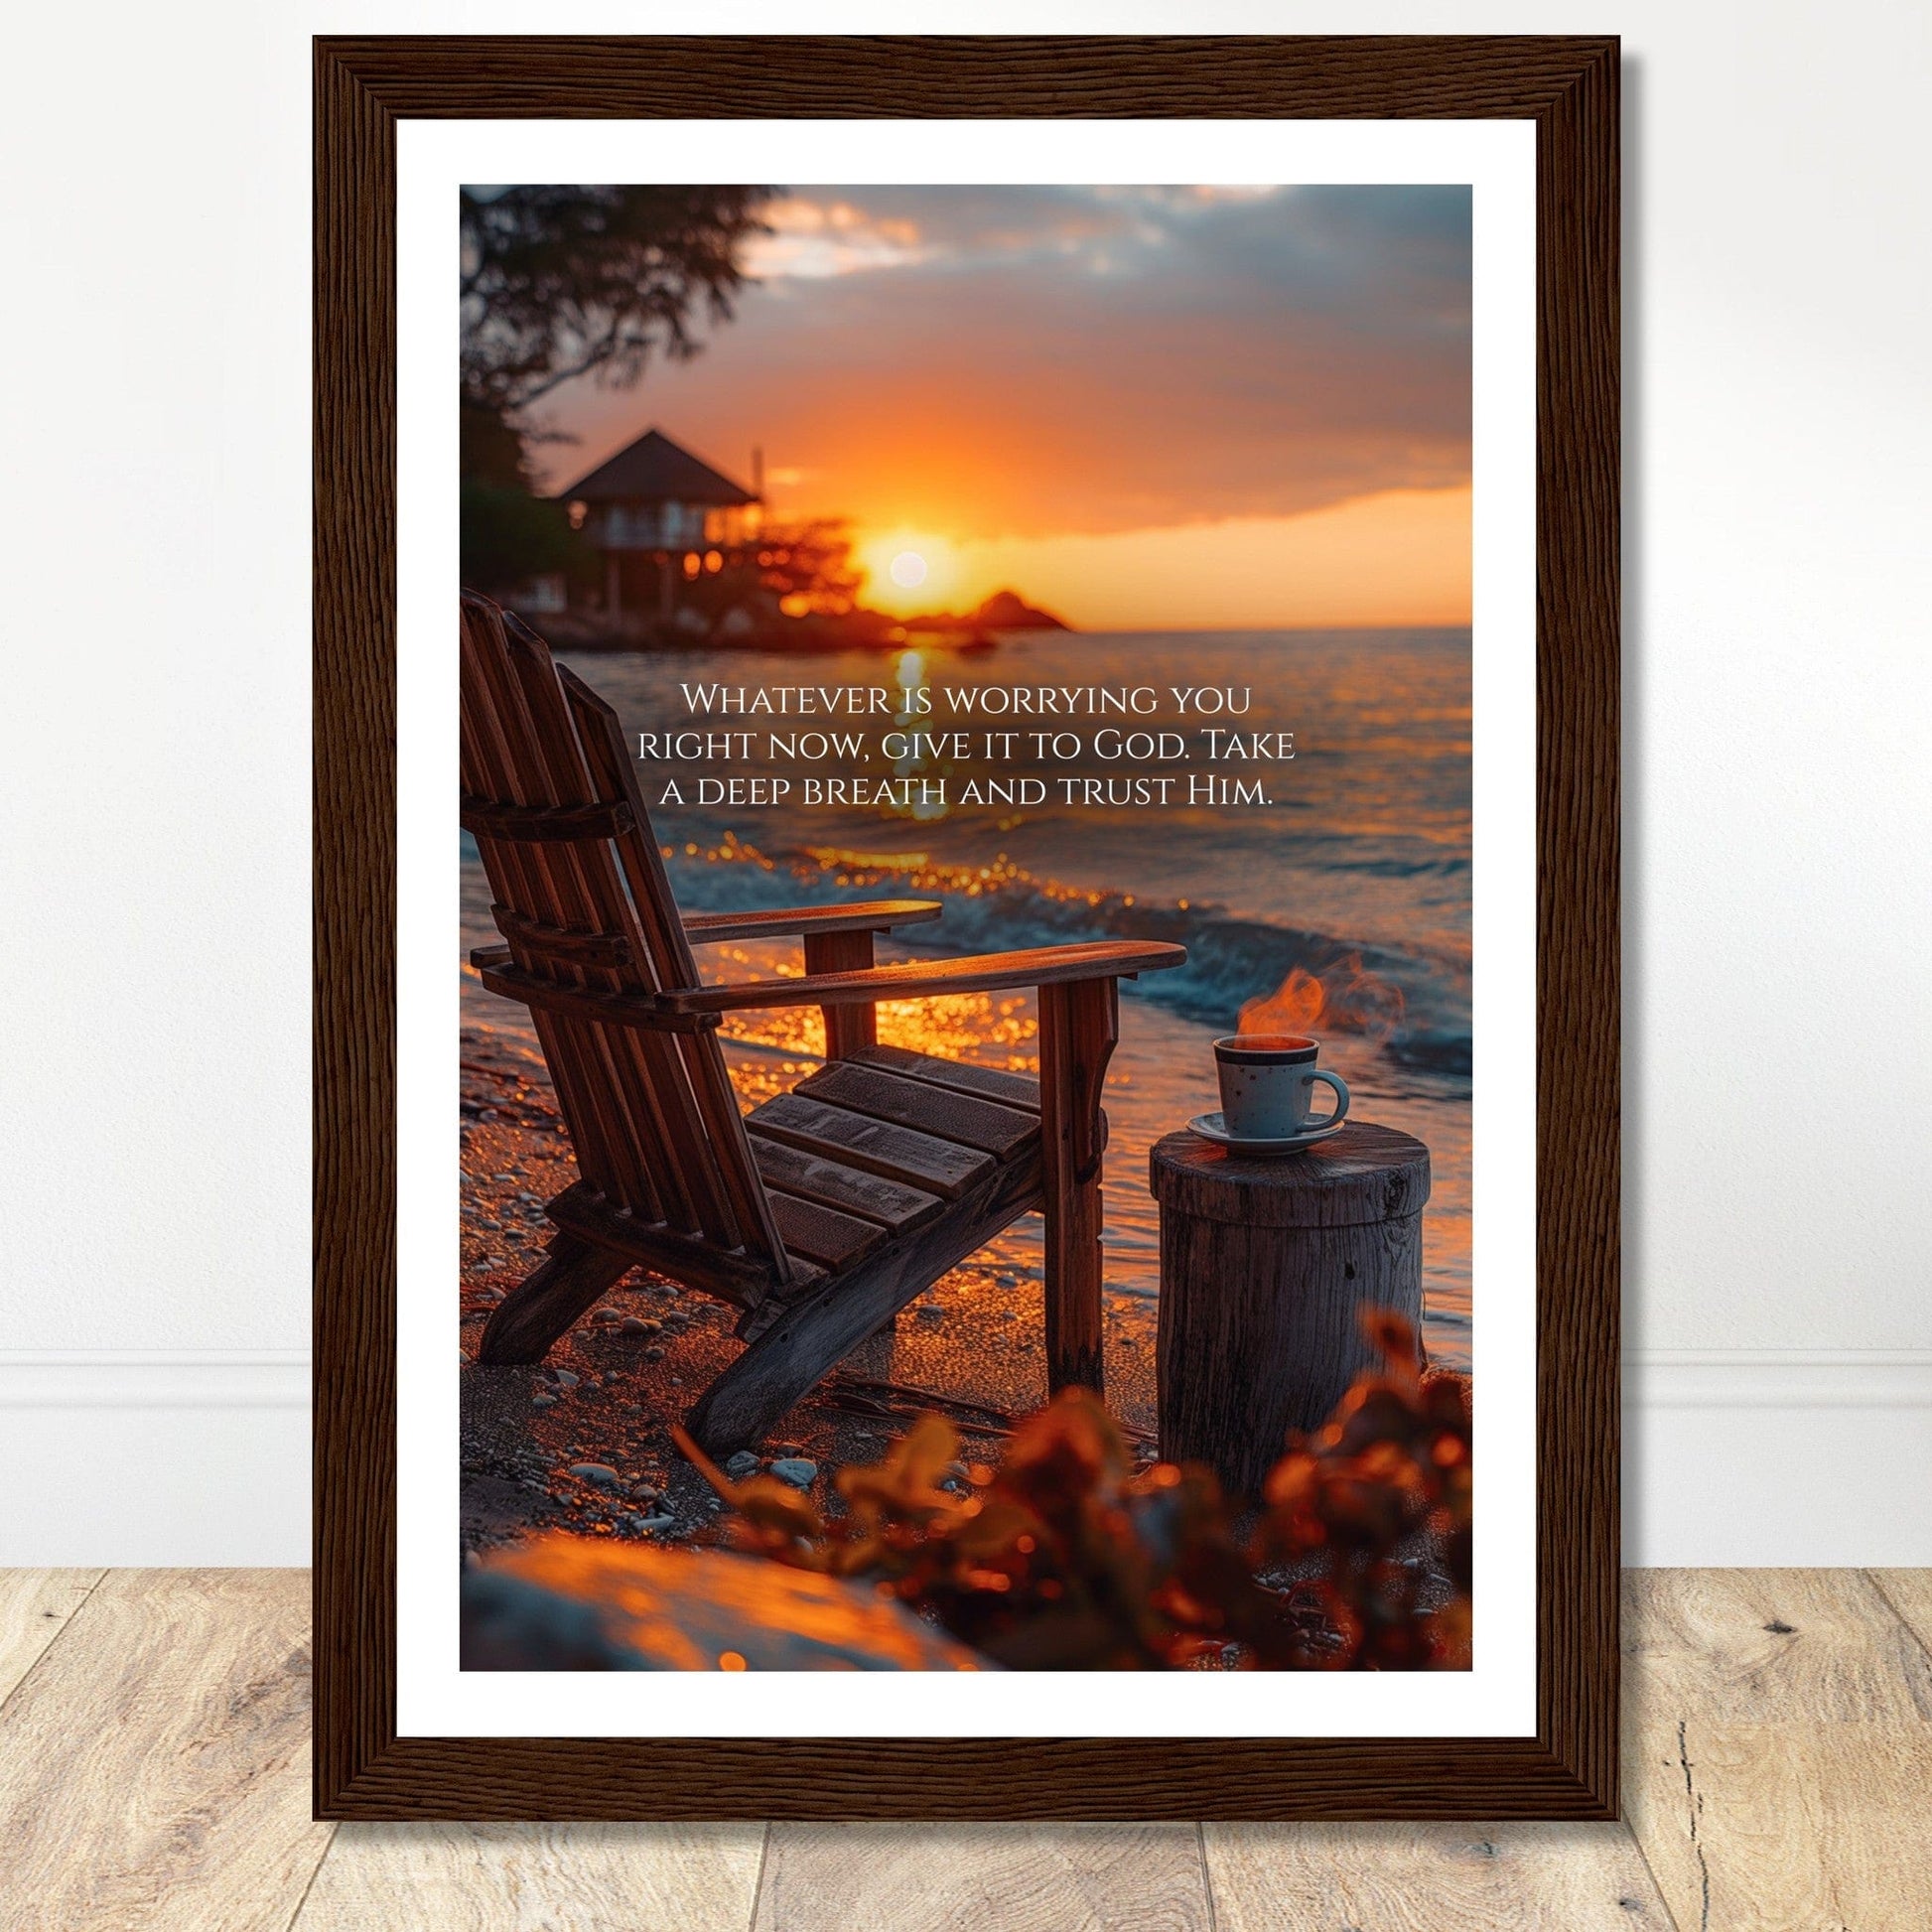 Coffee With My Father Print Material 21x29.7 cm / 8x12″ / Framed / Dark wood frame Breathe and Trust - Custom Art